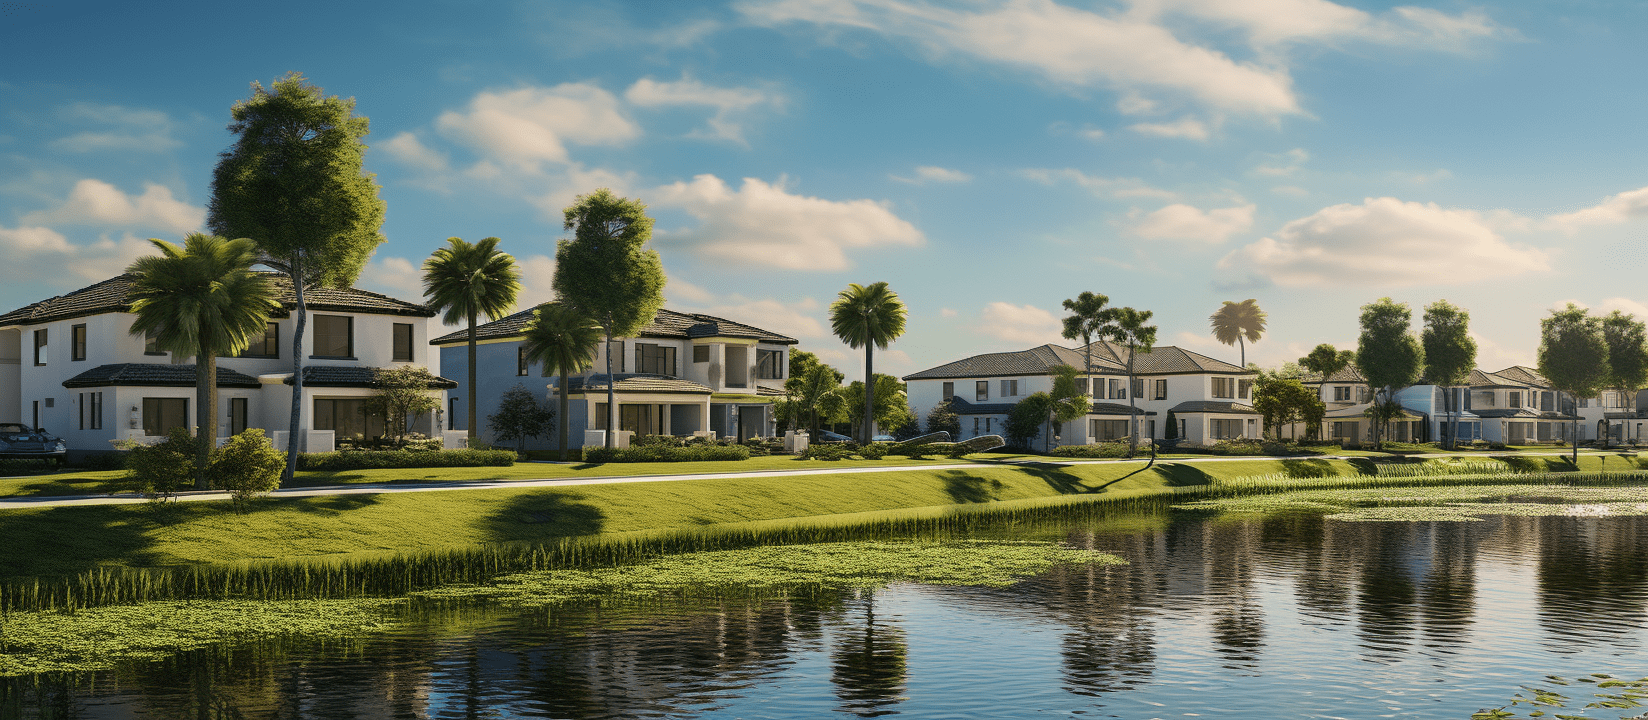 the oaks palm city homes for sale